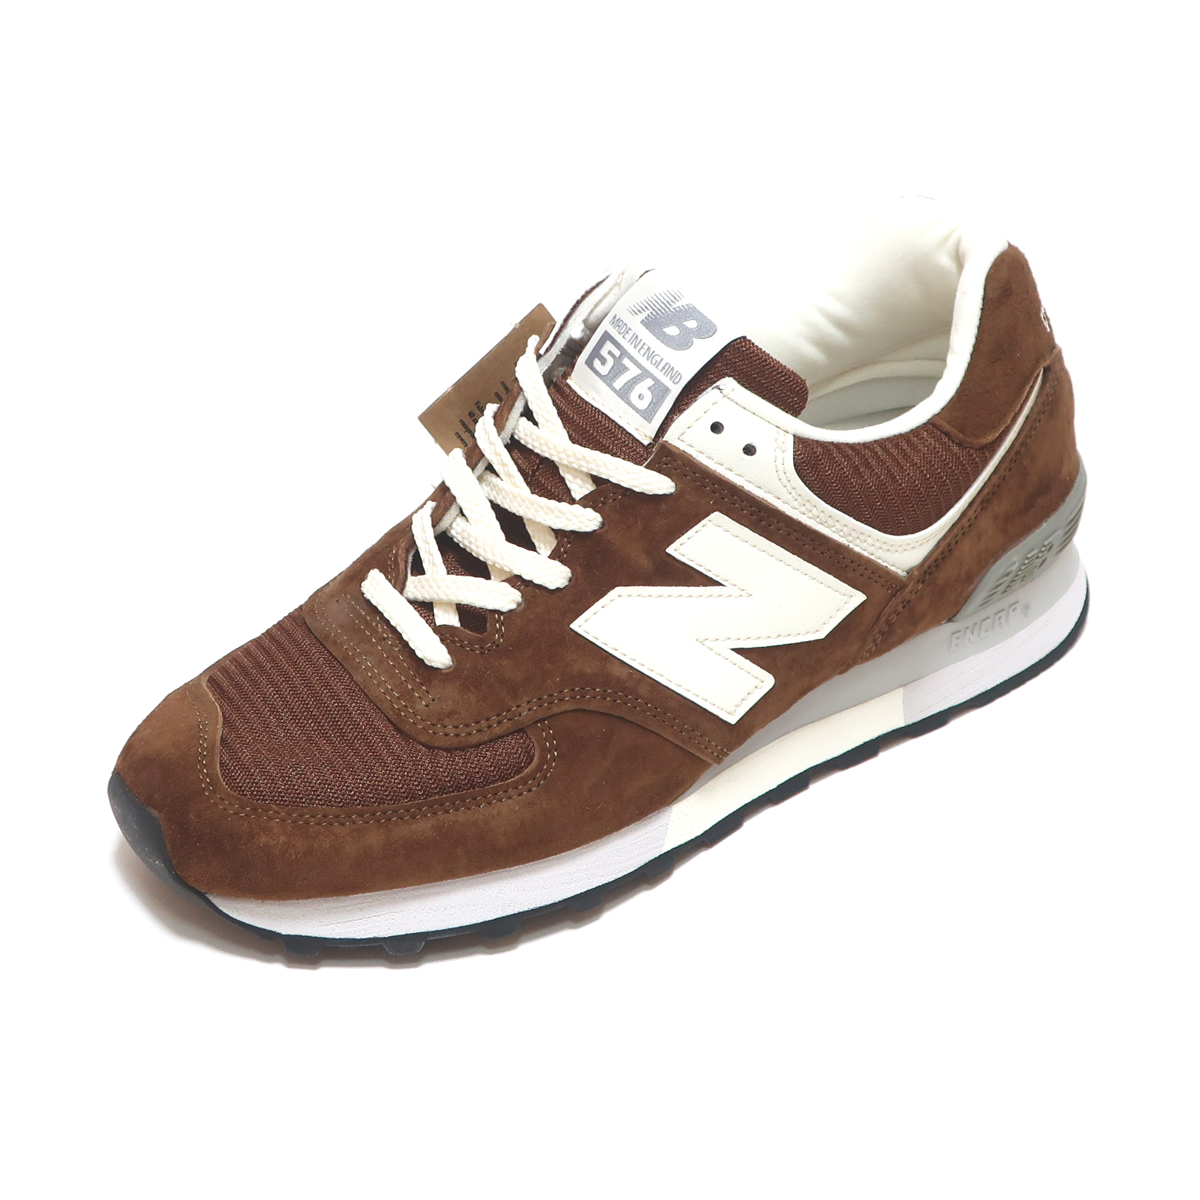 NEW BALANCE OU576BRN BROWN SUEDE US8.5 26.5cm MADE IN UK M576 ENGLAND ( ニューバランス 576 スウェード ブラウン 茶色 UK製 )_画像4